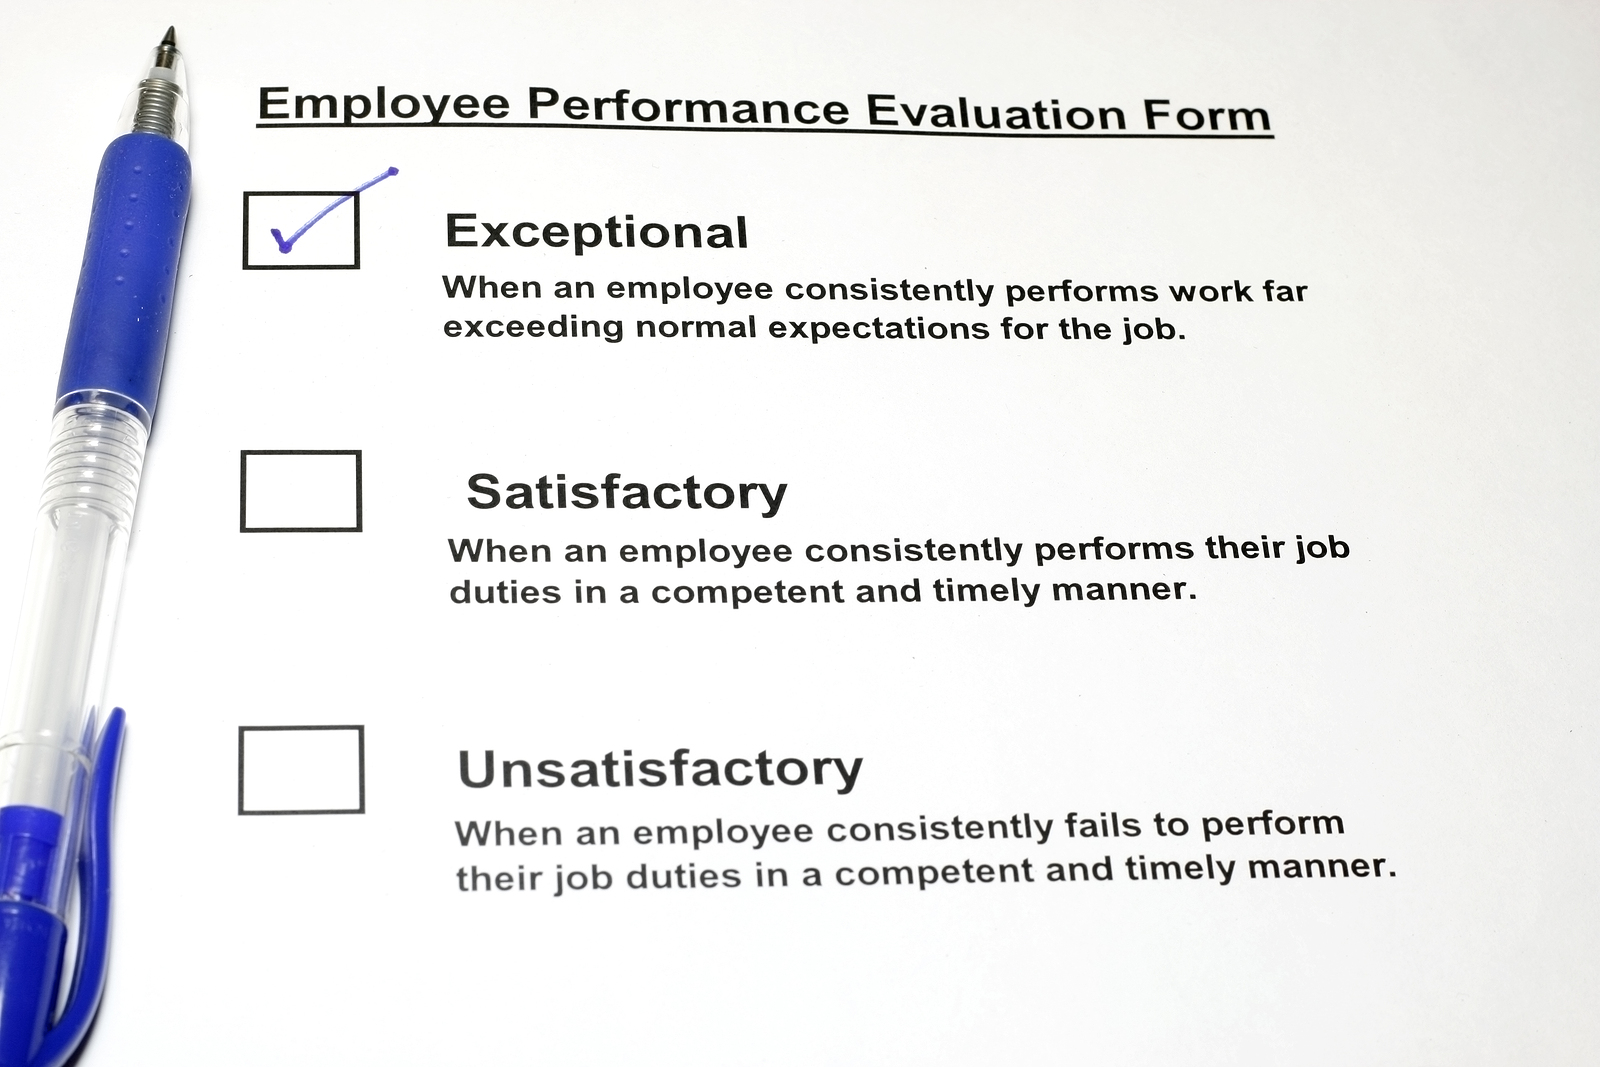 Performance Management: an employee evaluation form.